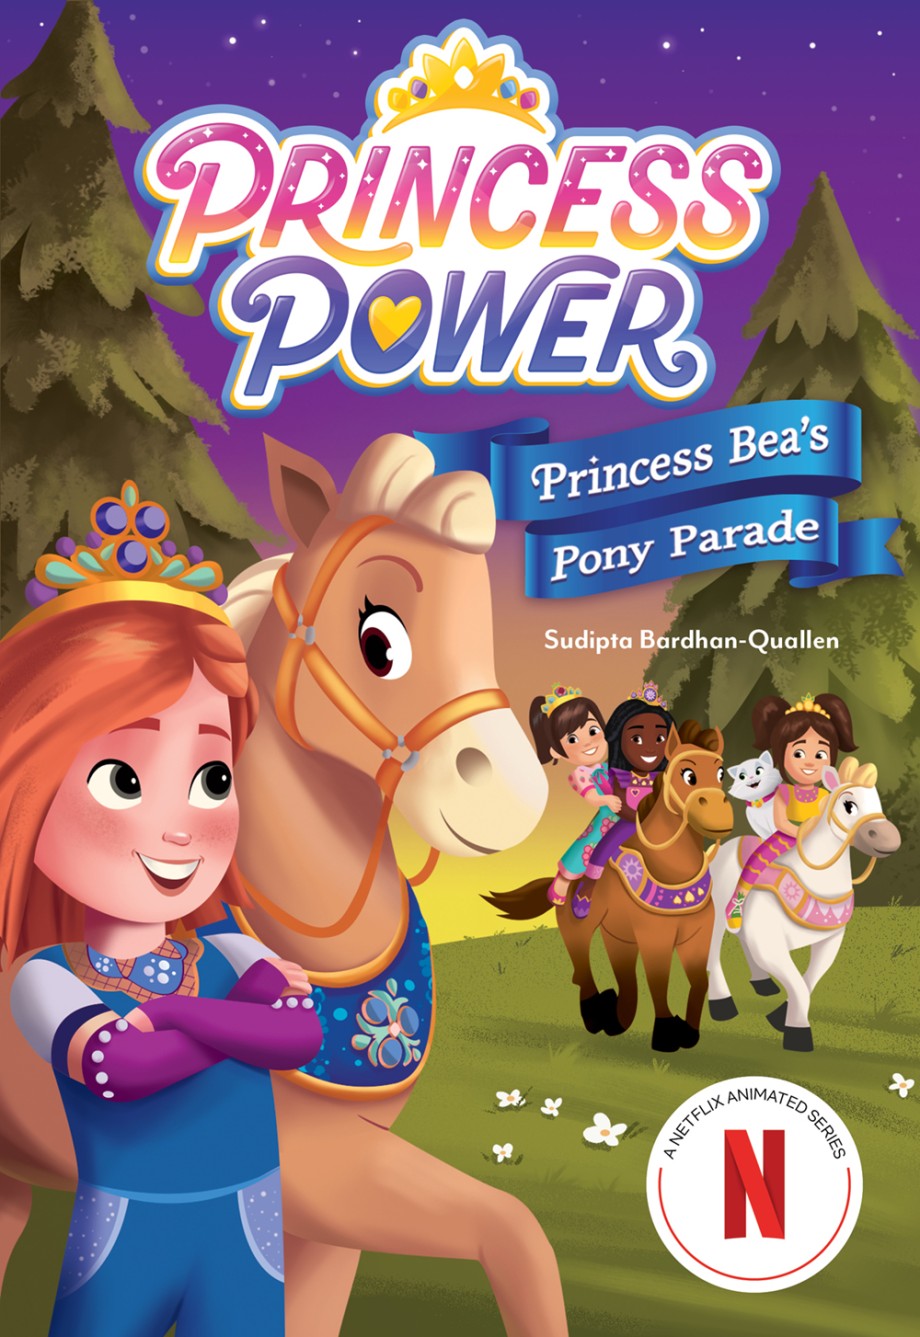 Pretty Princesses Coloring & Activity Book: unknown author: :  Books